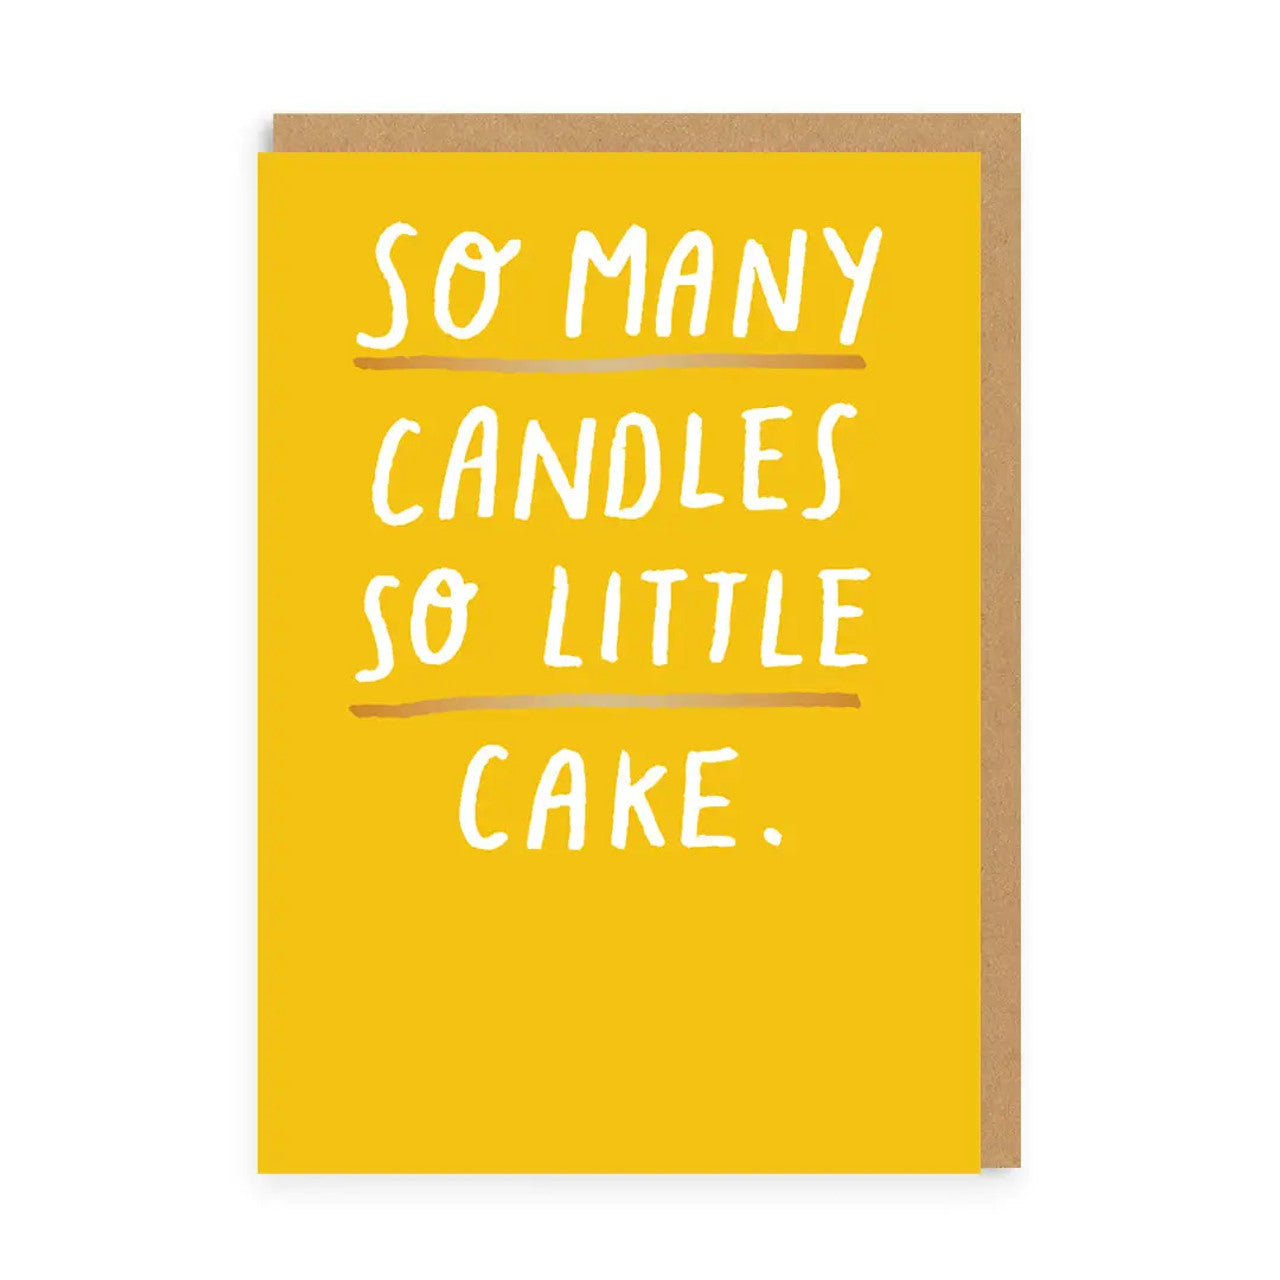 Birthday Card text reads "So Many Candles So Little Cake"